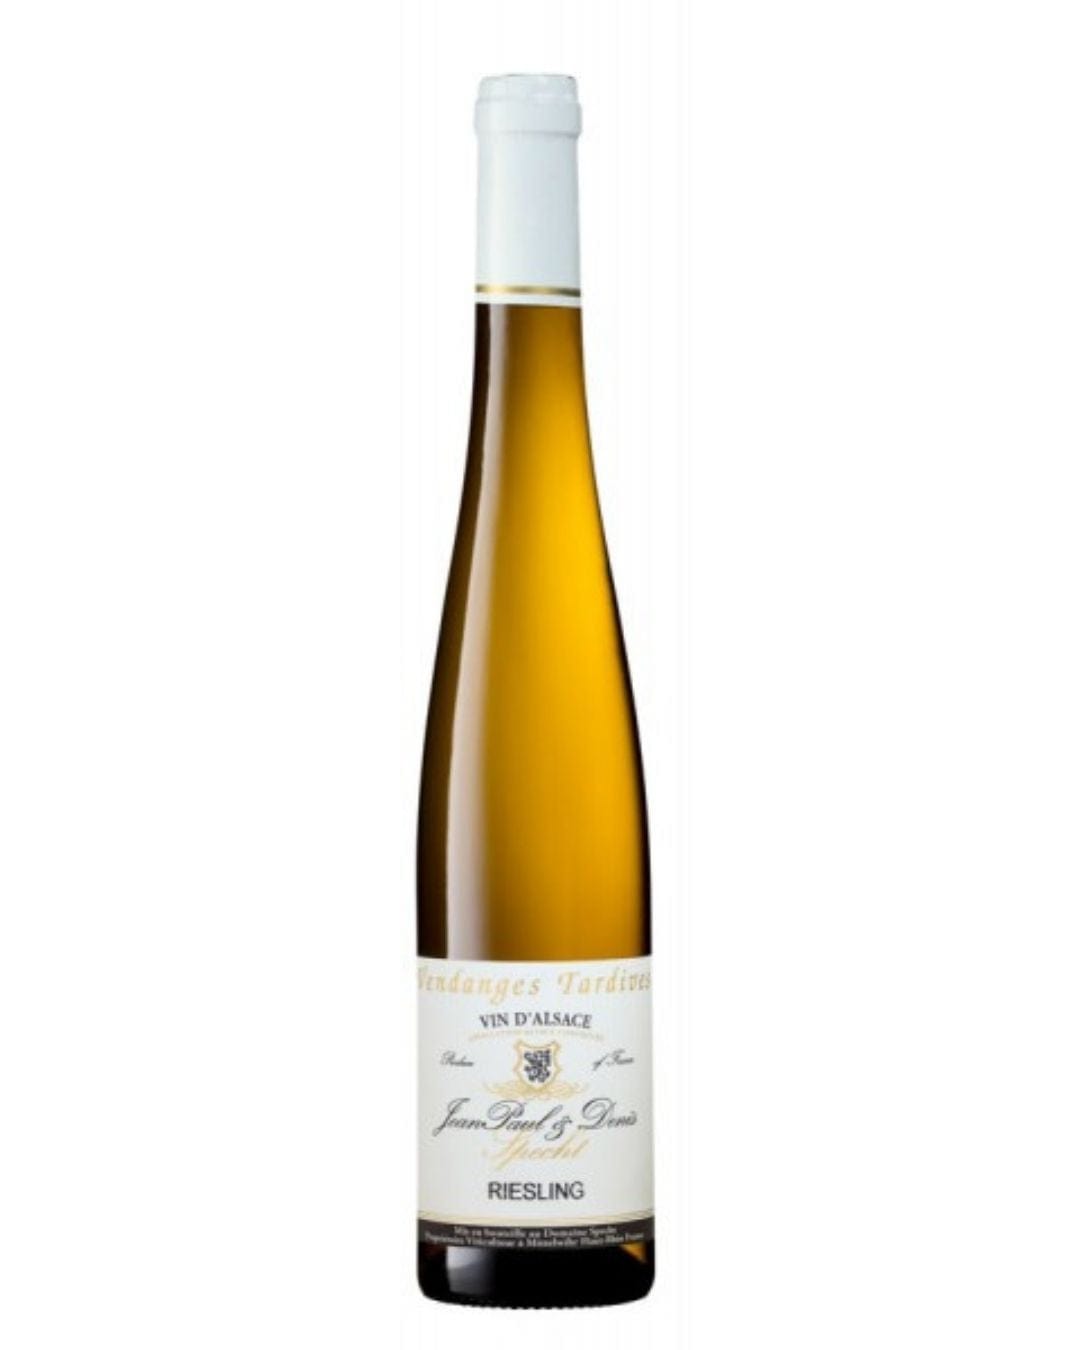 Shop Domaine Specht Domaine Specht Riesling Vendanges Tardives 2018 online at PENTICTON artisanal French wine store in Hong Kong. Discover other French wines, promotions, workshops and featured offers at pentictonpacific.com 